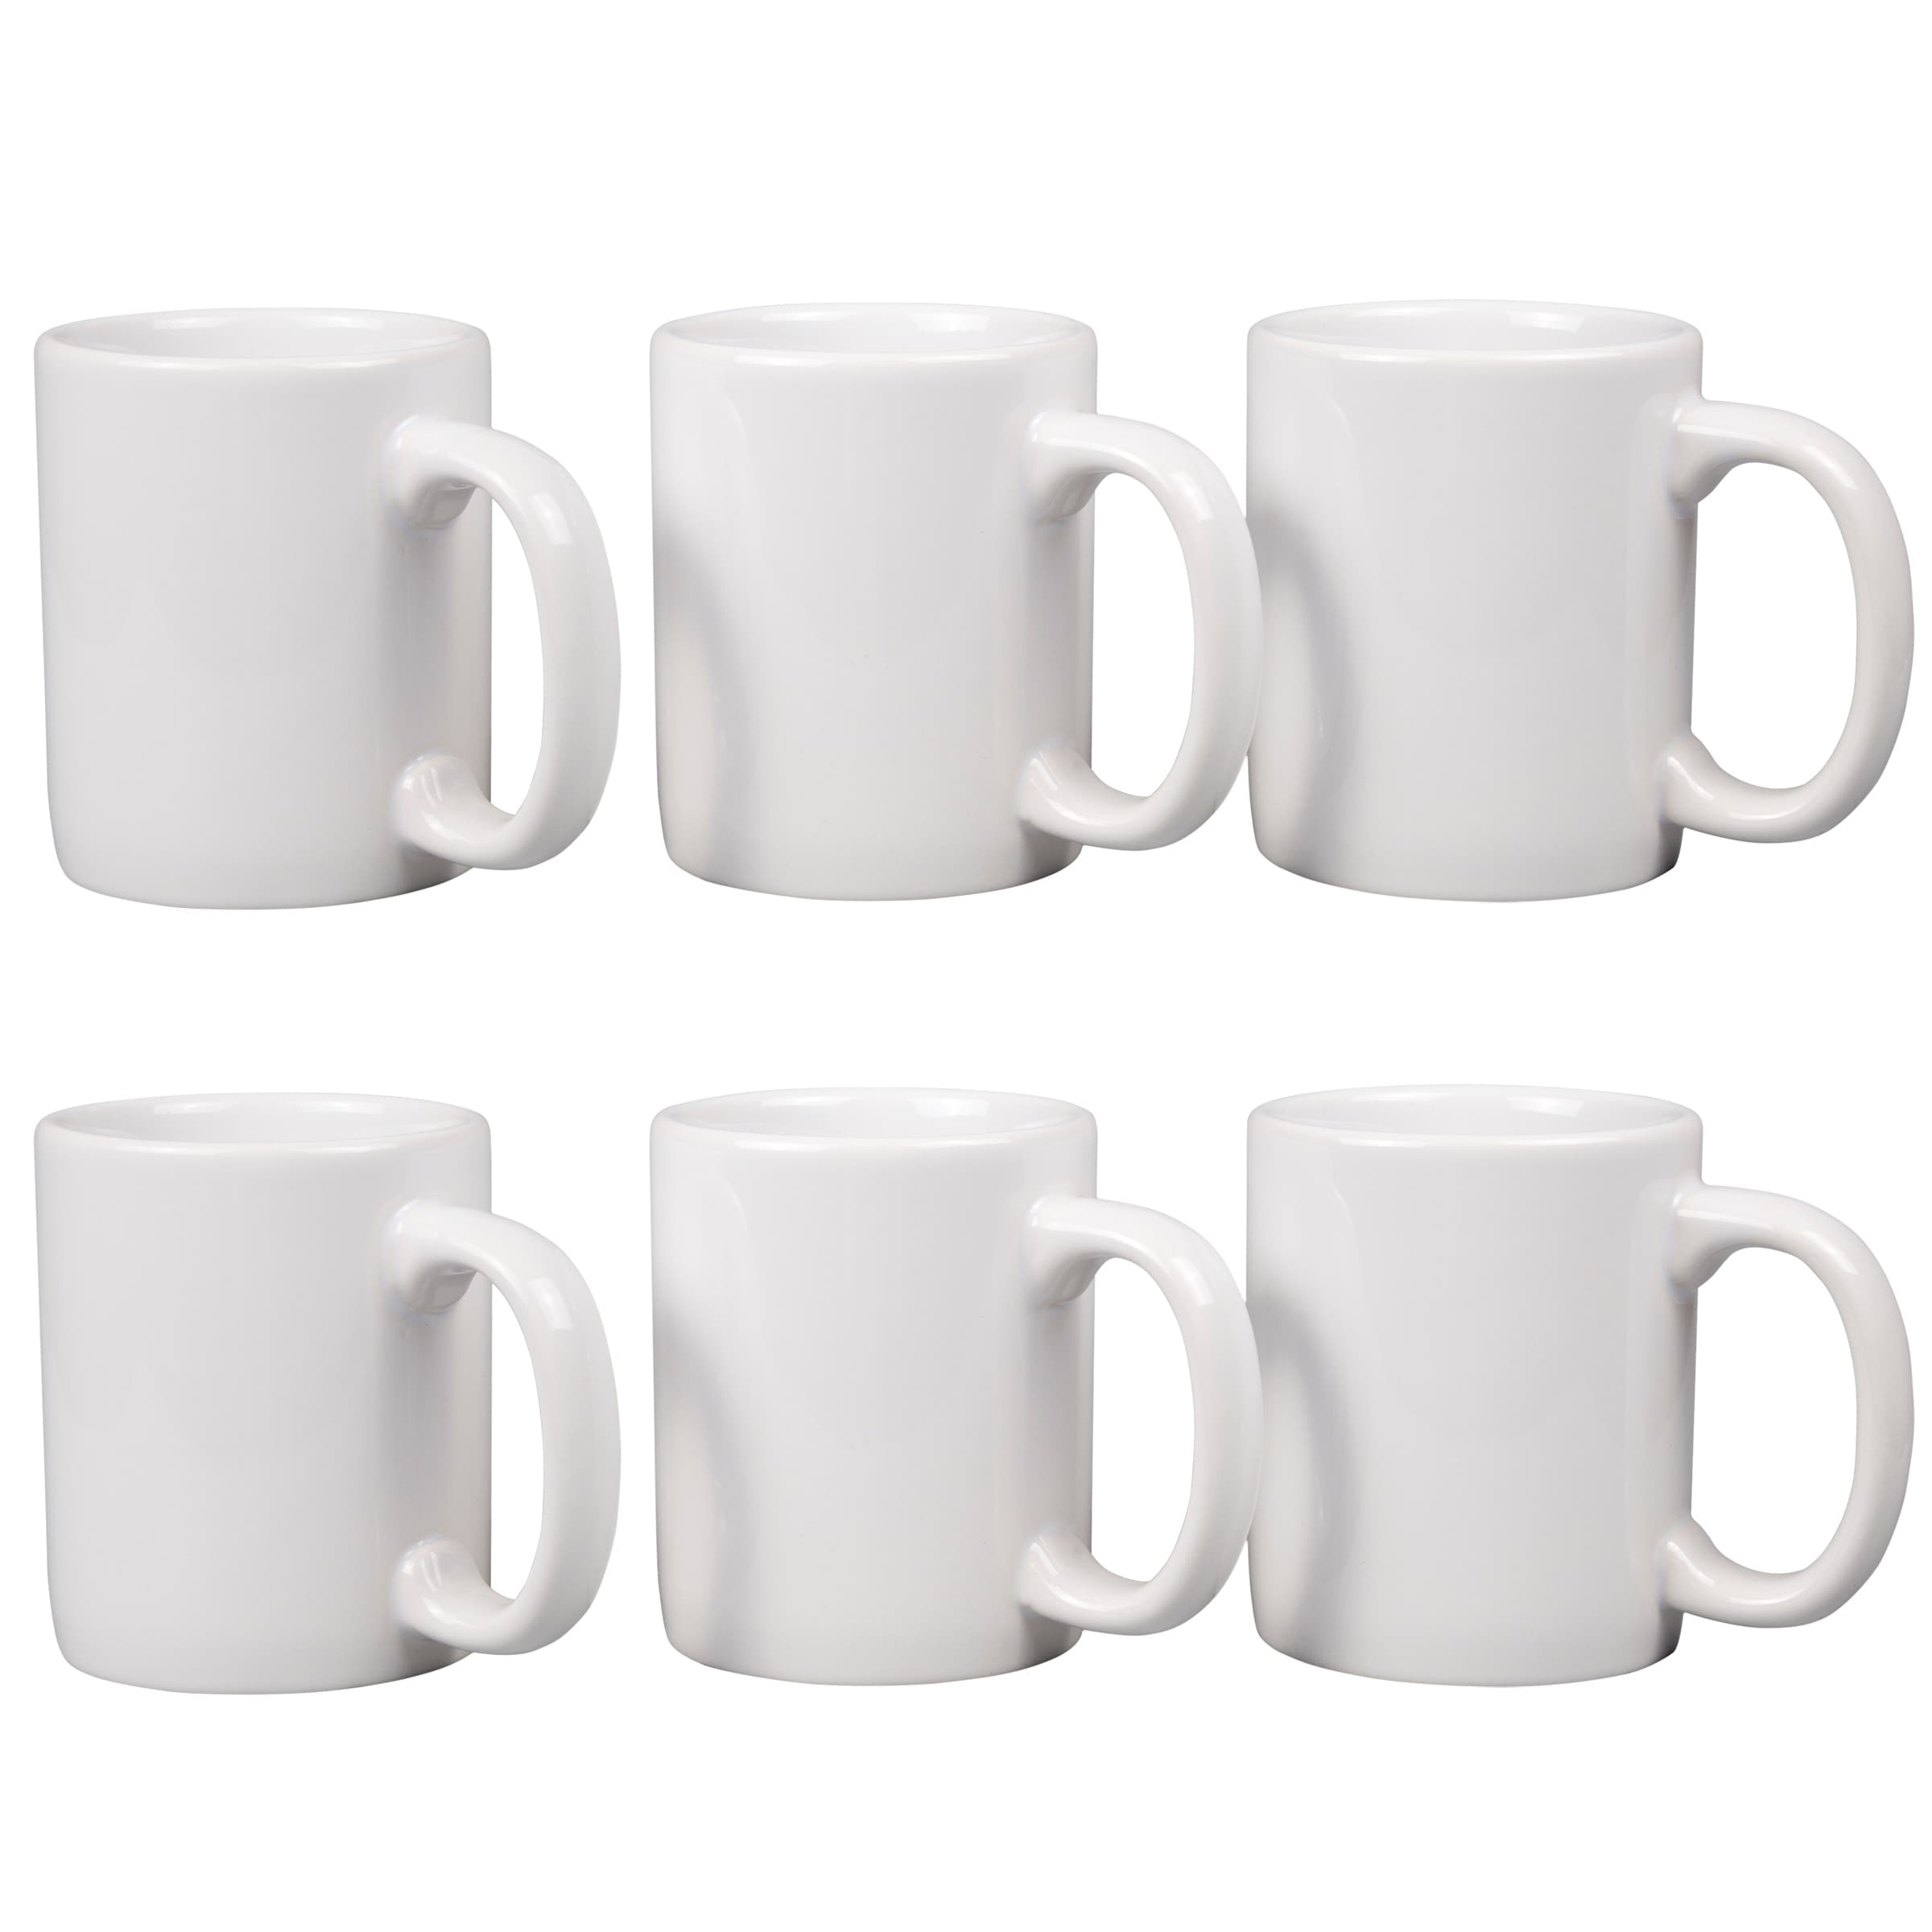 DOWAN 20 Oz Coffee Mugs with Large Handle, Ceramic Large White Mugs, Set of  6 White Coffee Mugs, Porcelain Large Cup for Coffee, Tea, Hot Cocoa